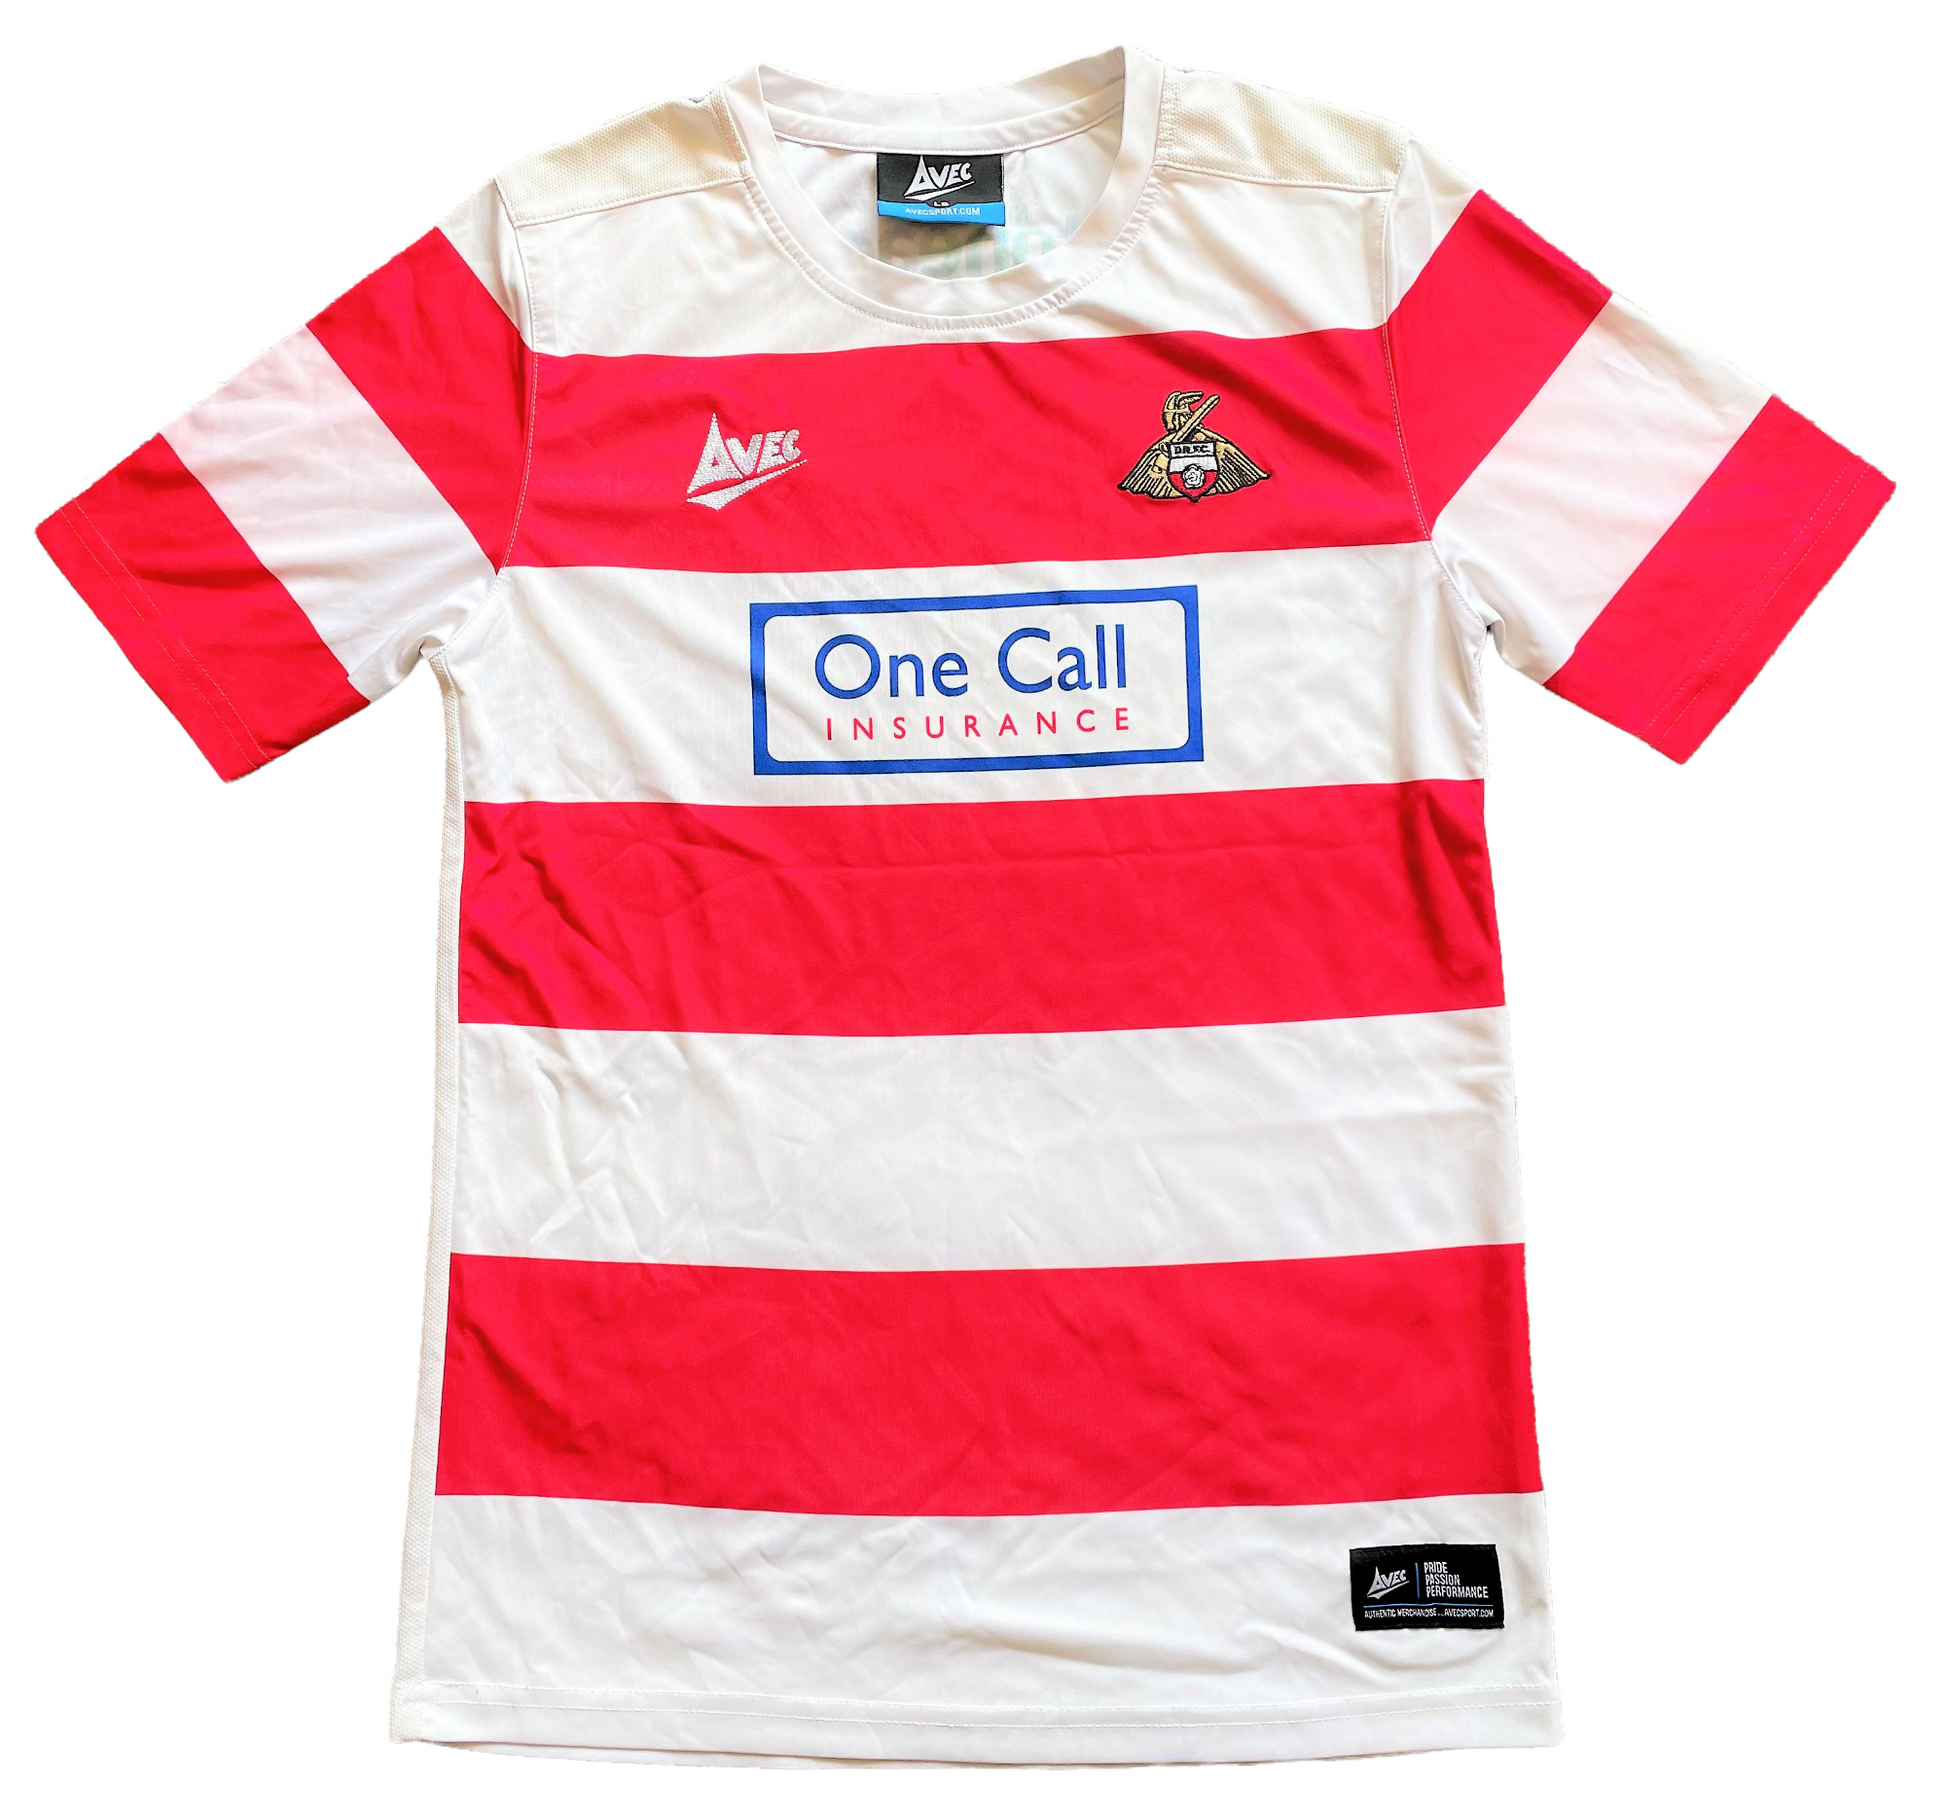 2015-16 Doncaster Rovers Home Shirt (very good) Large Boys